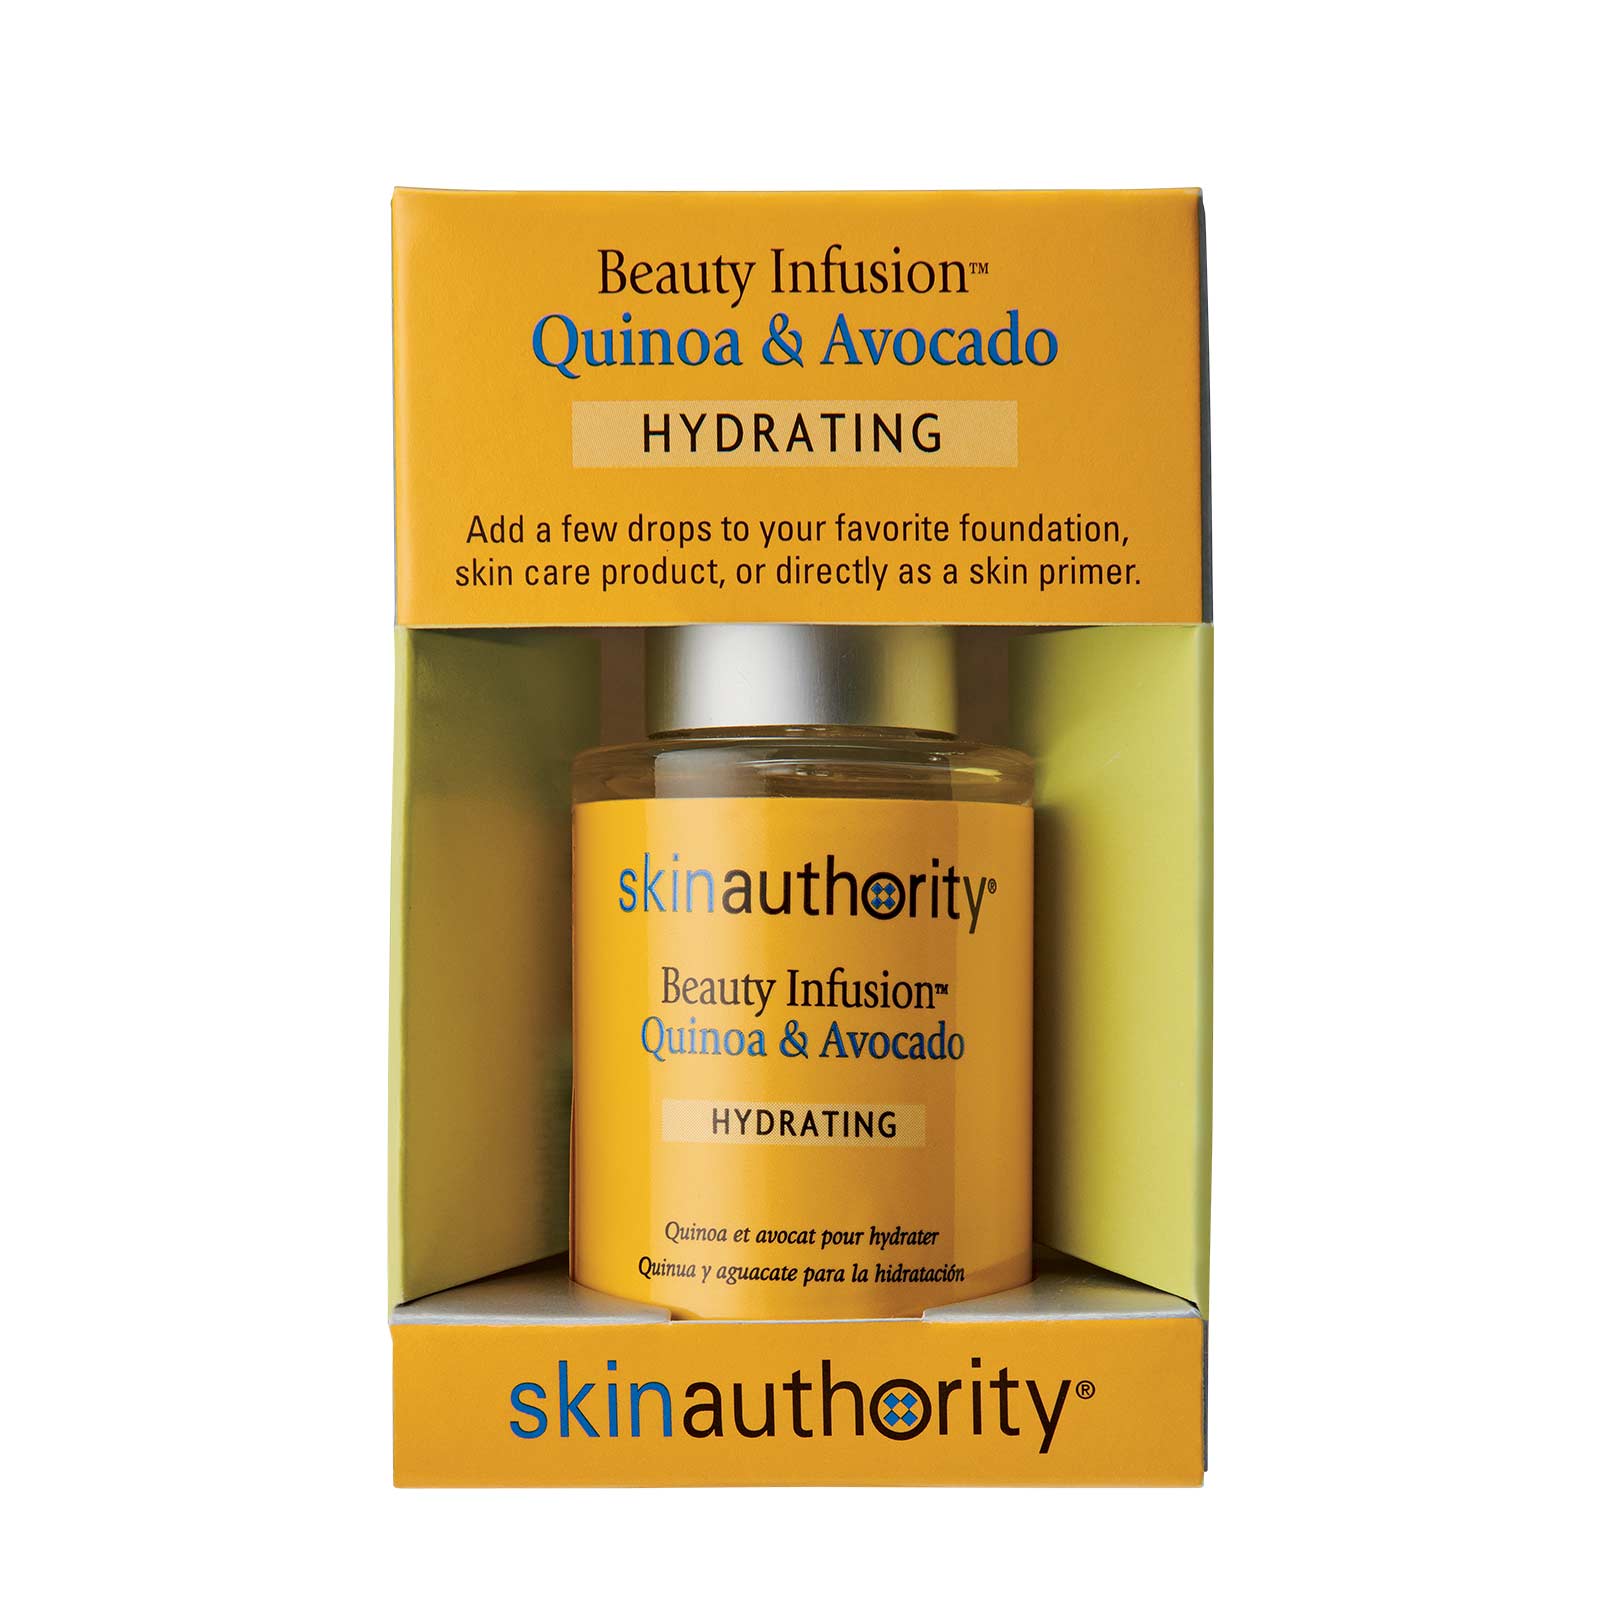 Beauty Infusion Quinoa & Avocado for Hydrating carton packaging by Skin Authority